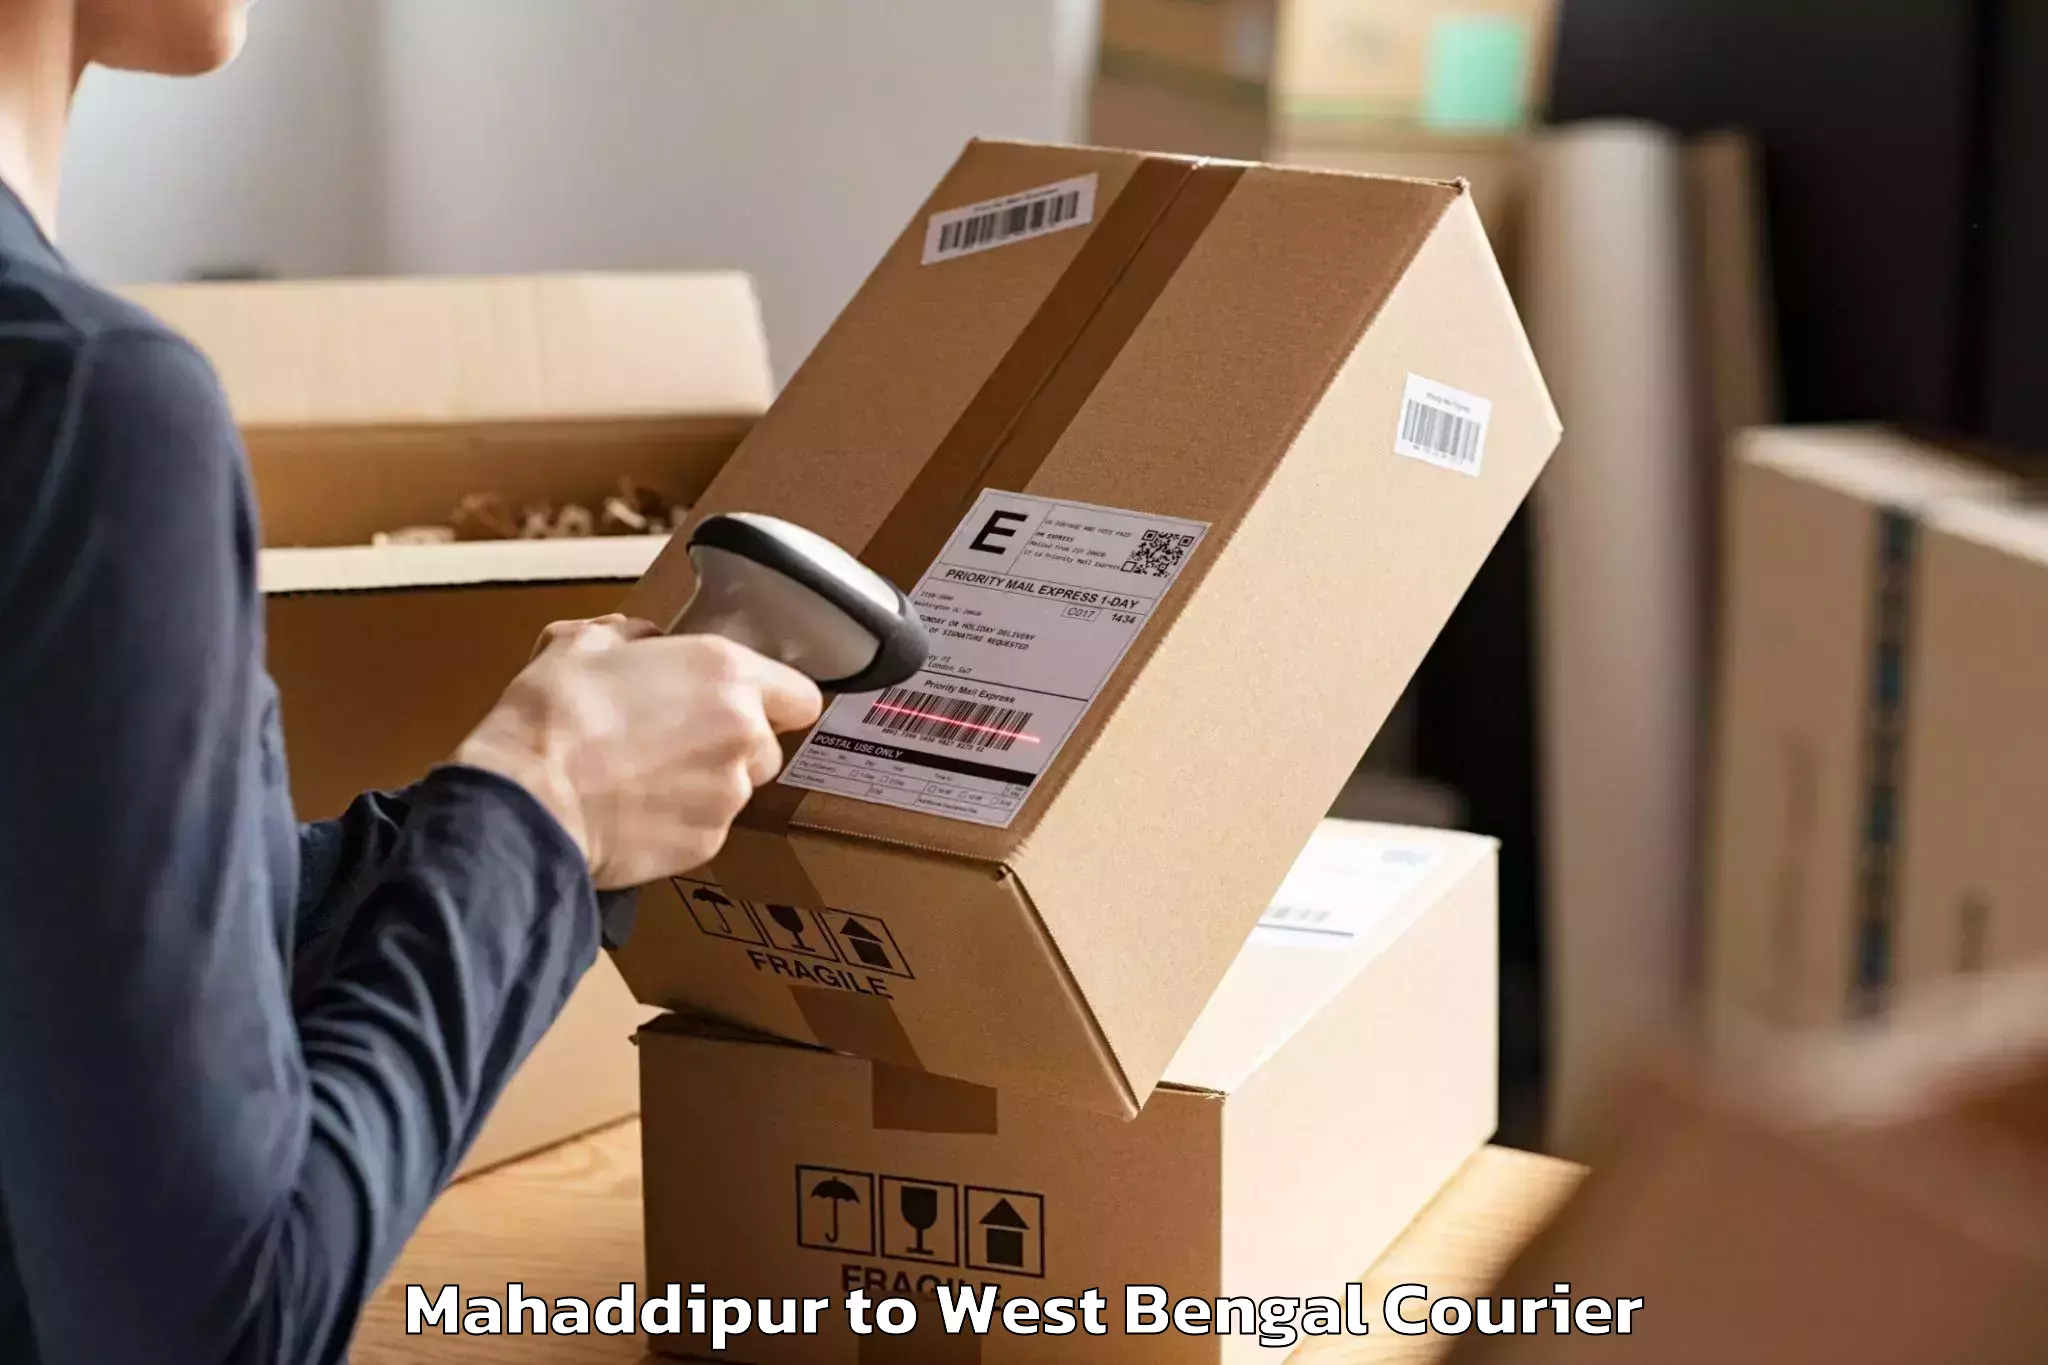 Home relocation experts Mahaddipur to Burdwan